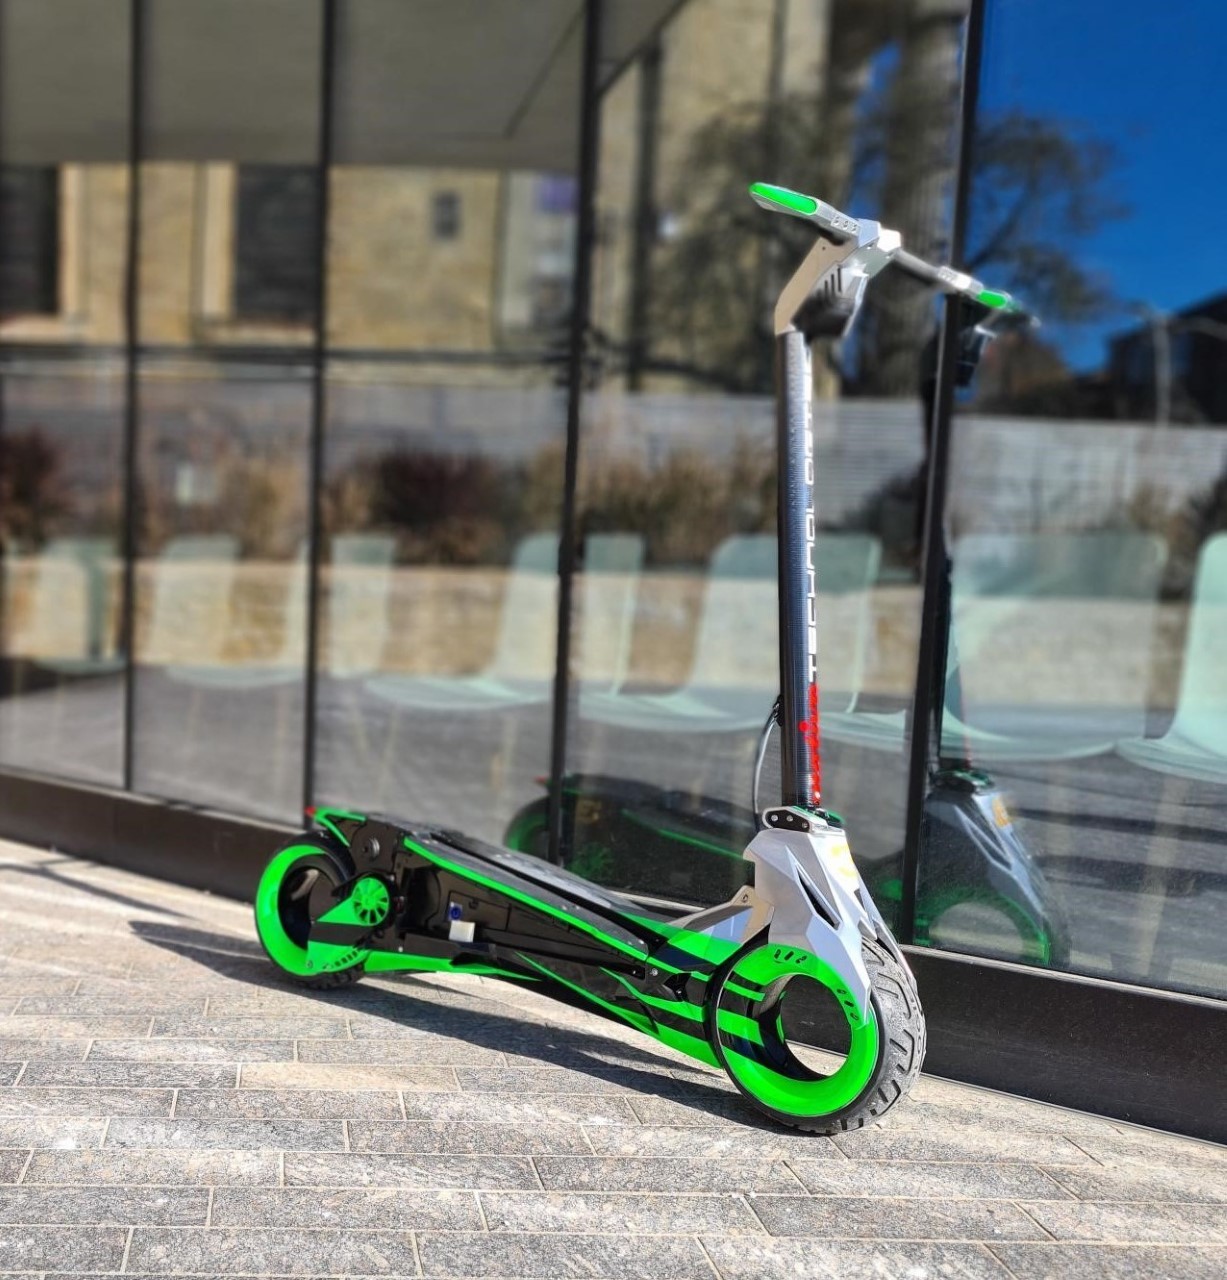 The stolen electric scooter